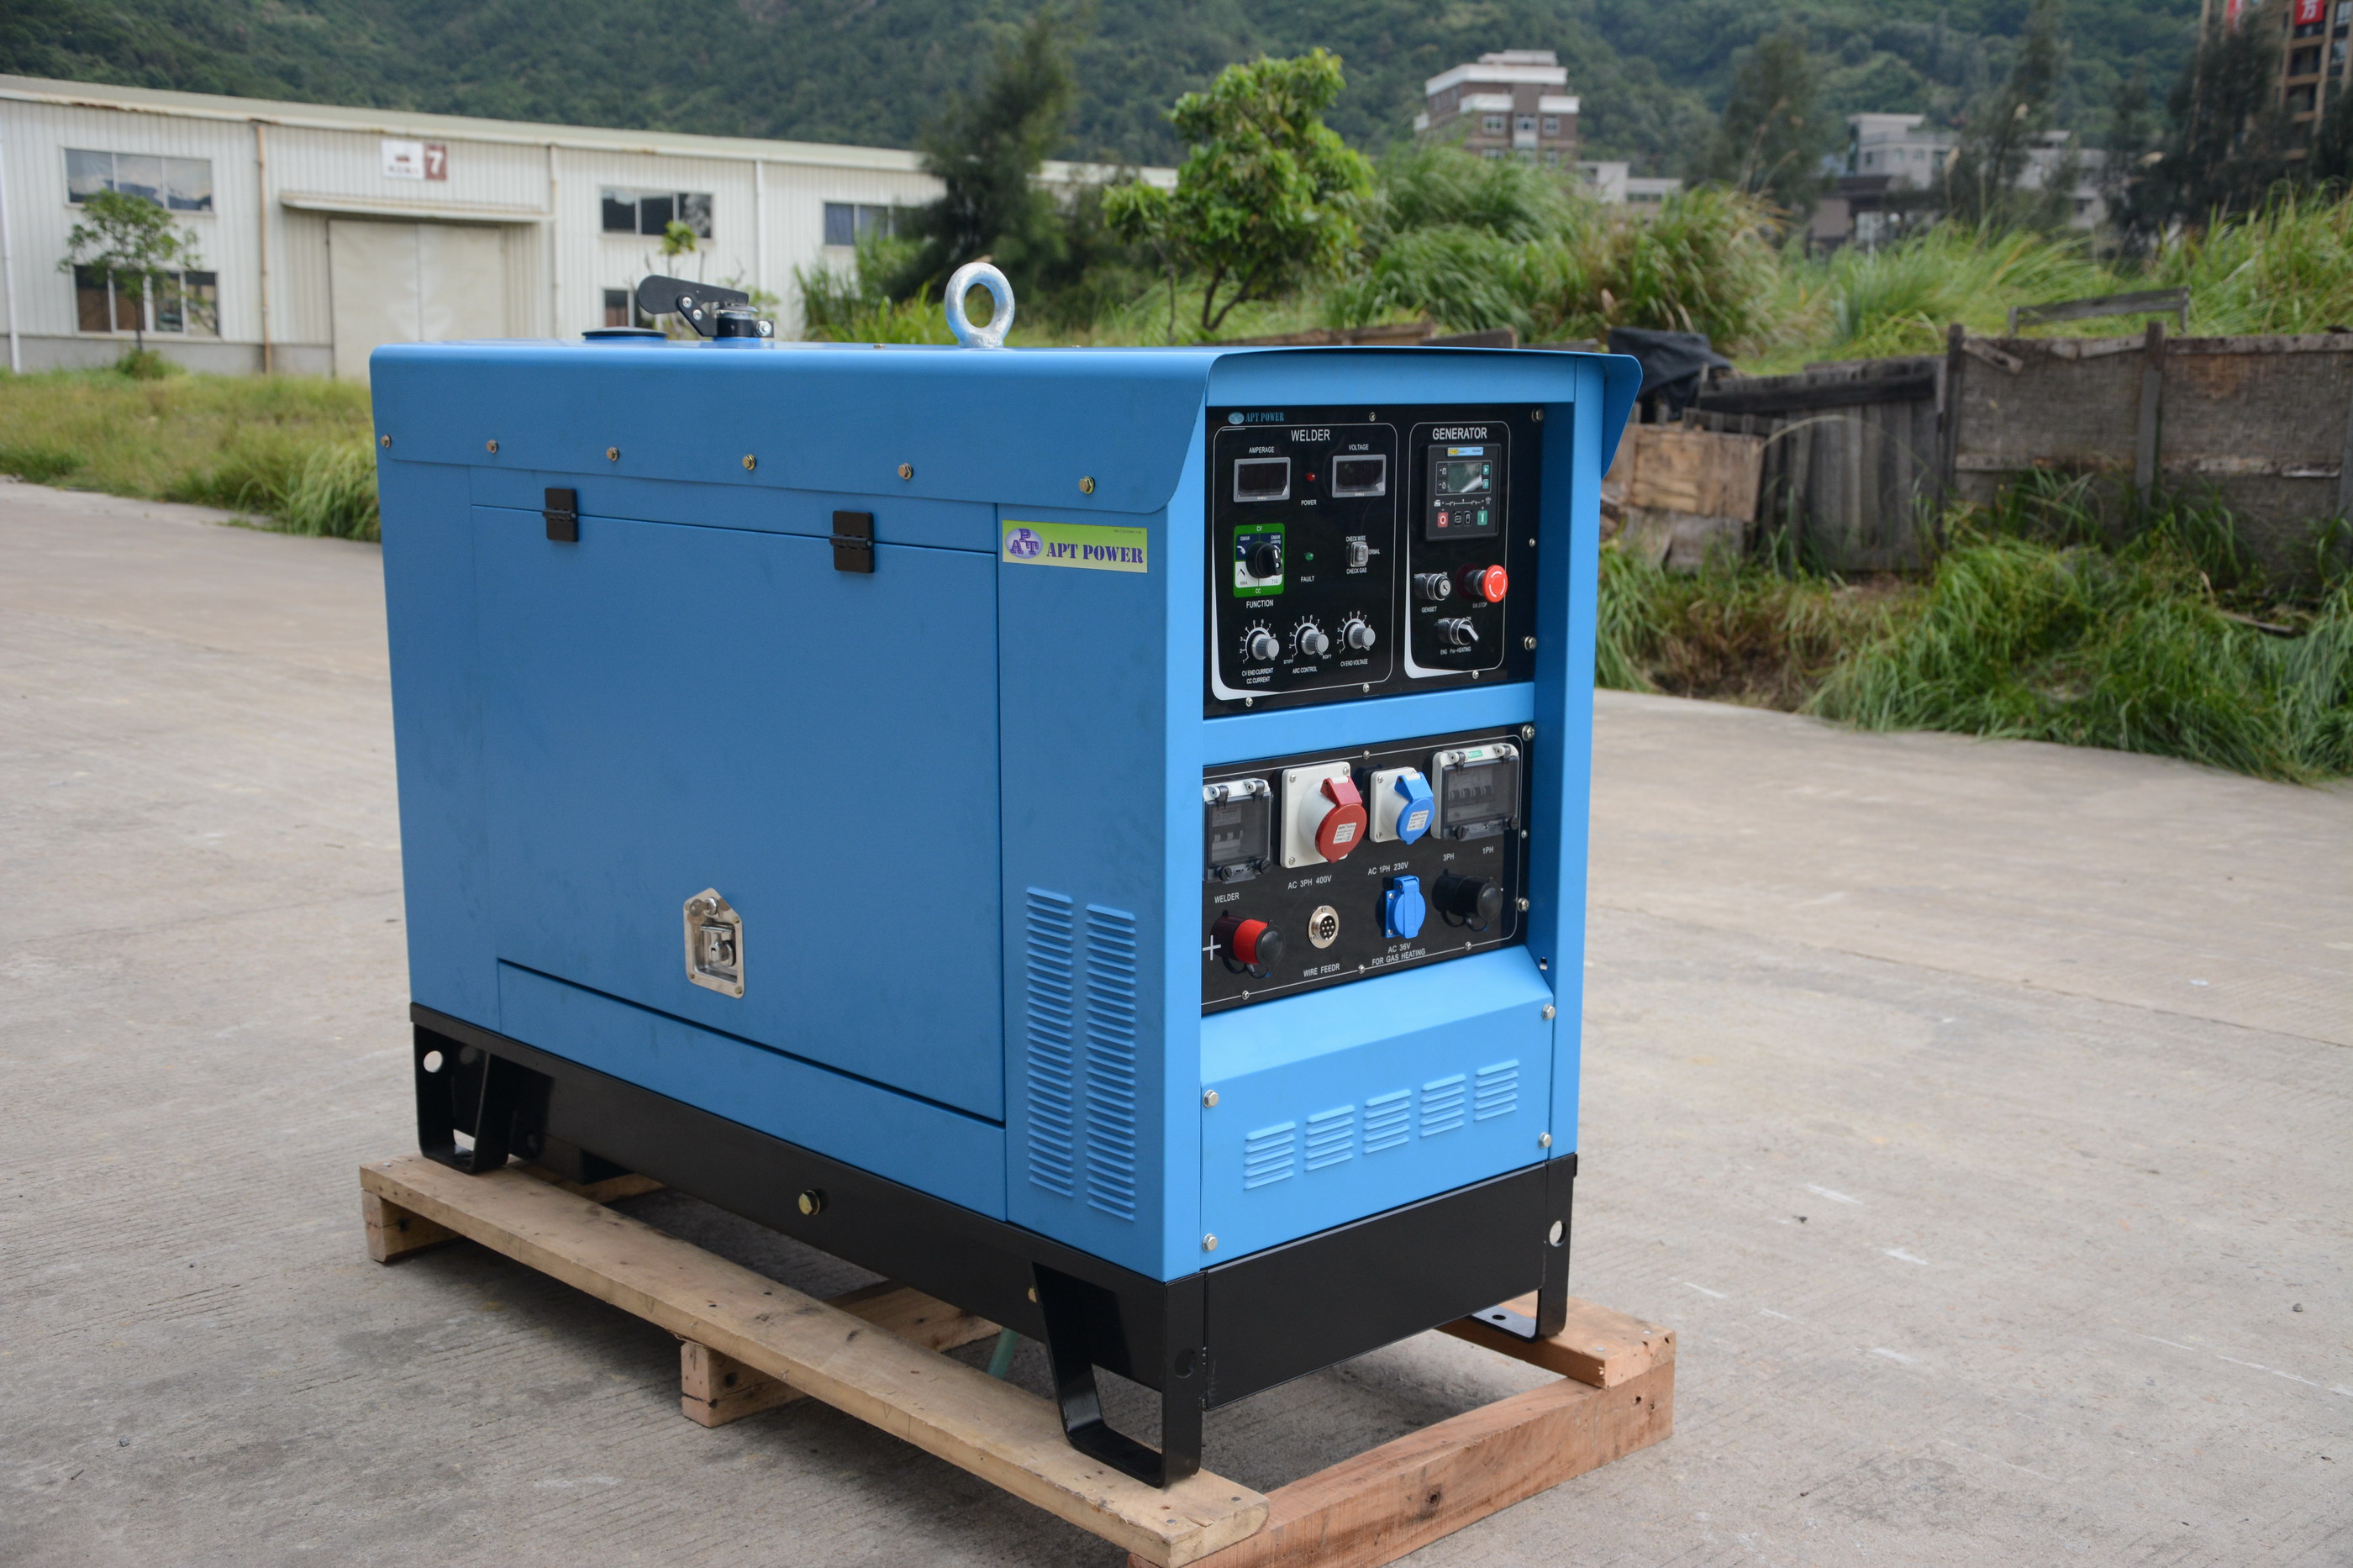  Welding Generator with Cummins Diesel Engine, MMA, GMAW and TIG Welding Functions Manufactures